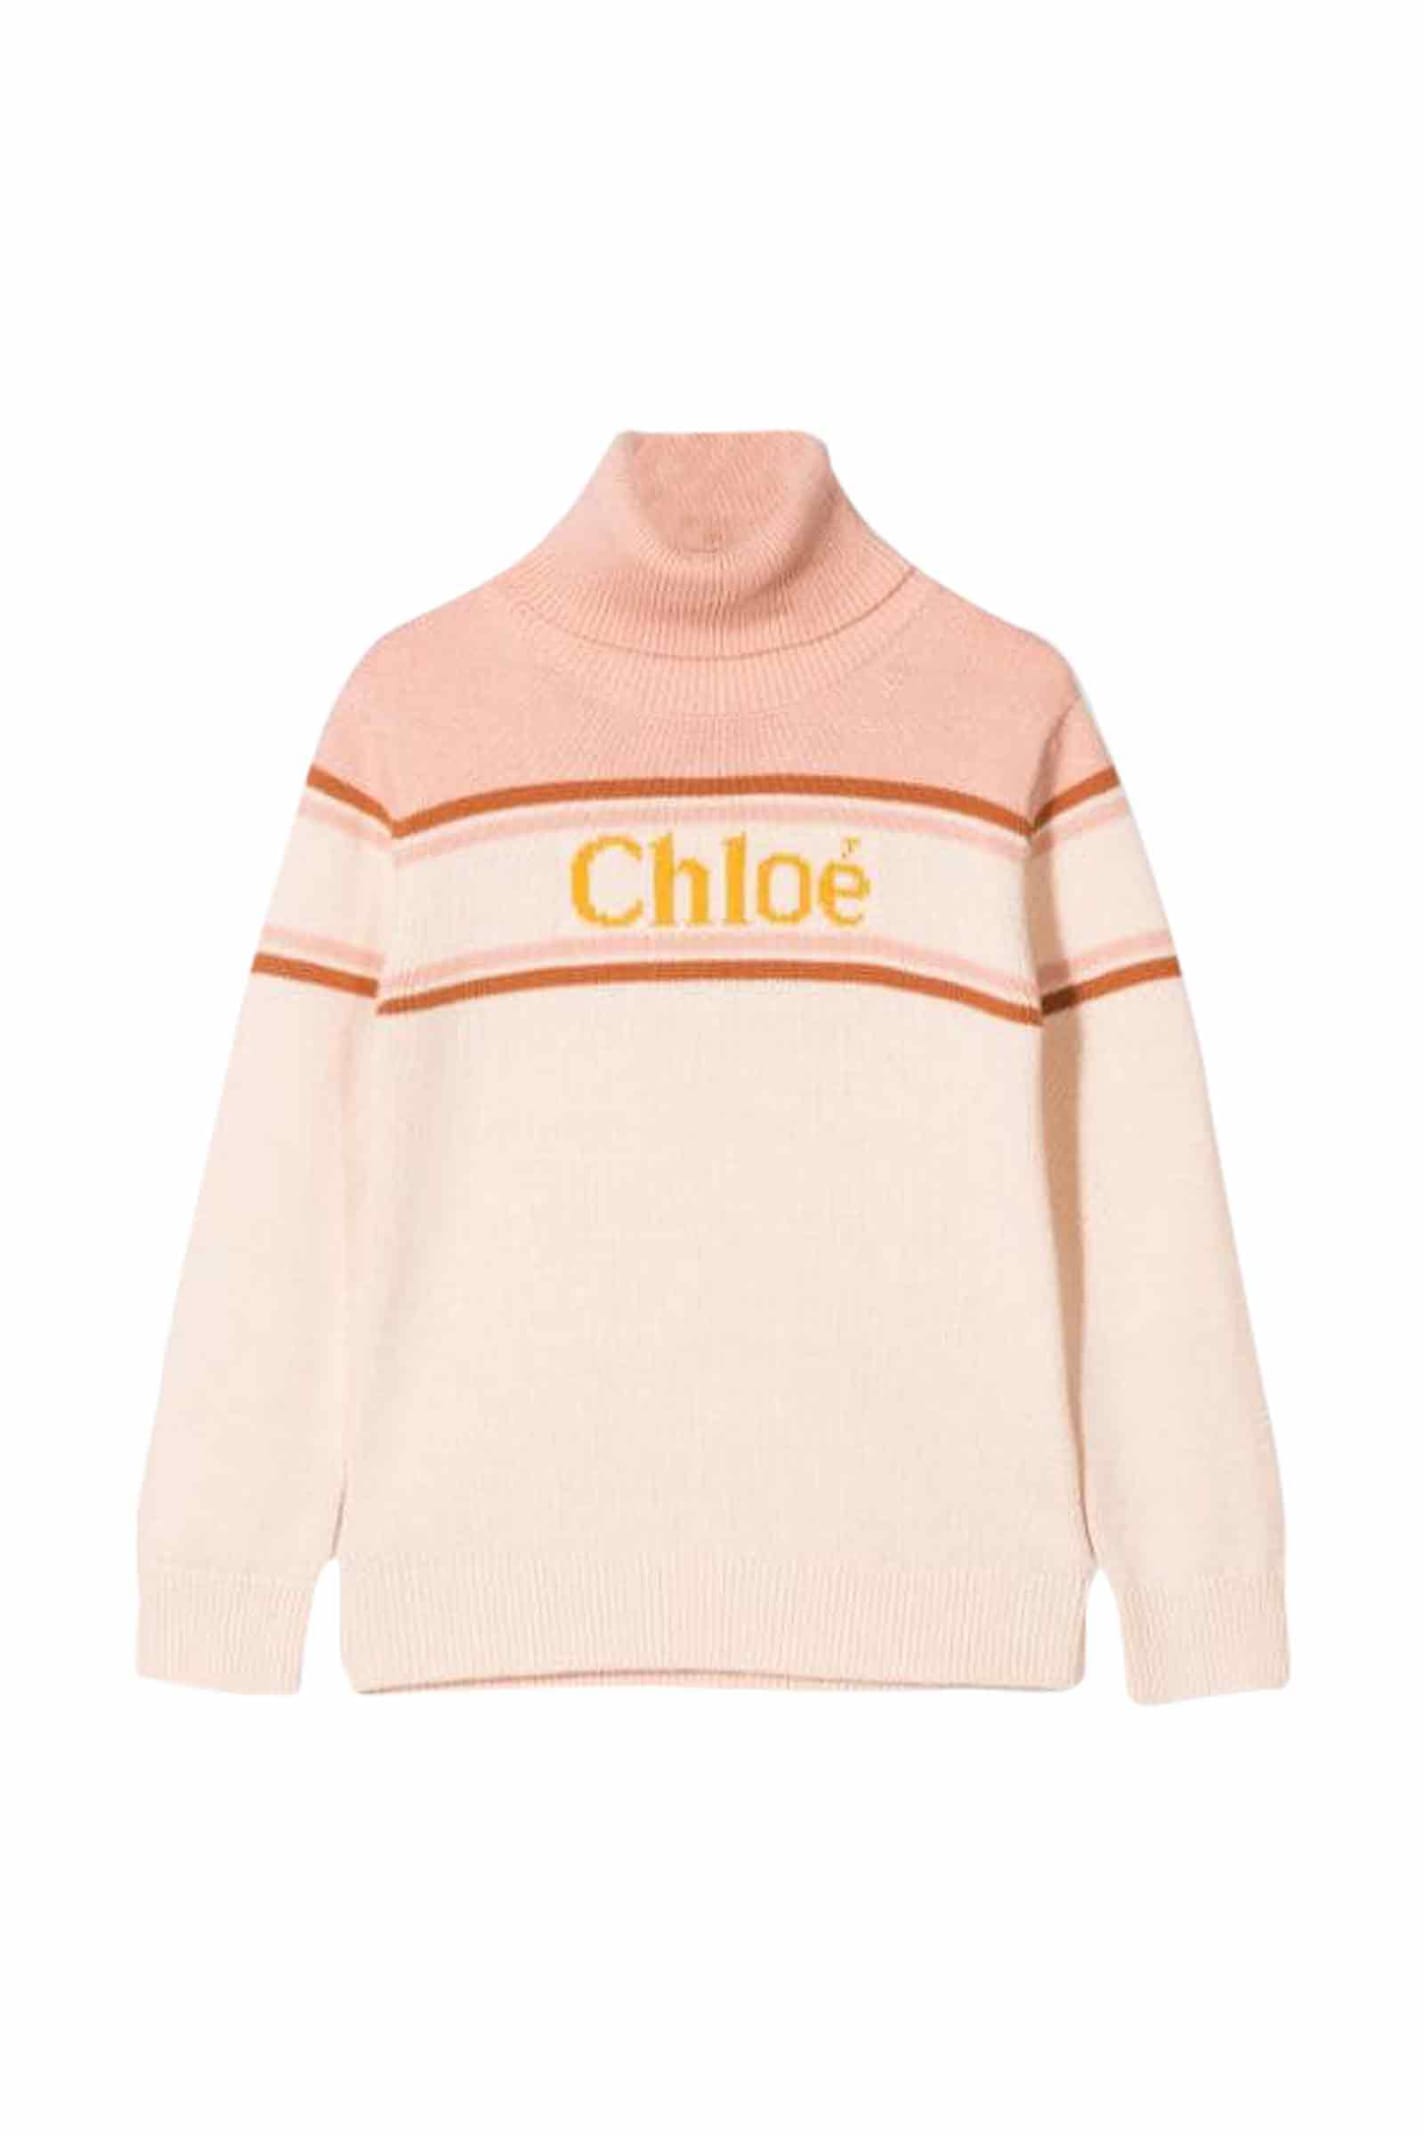 CHLOÉ EMBROIDERY SWEATER,10995236